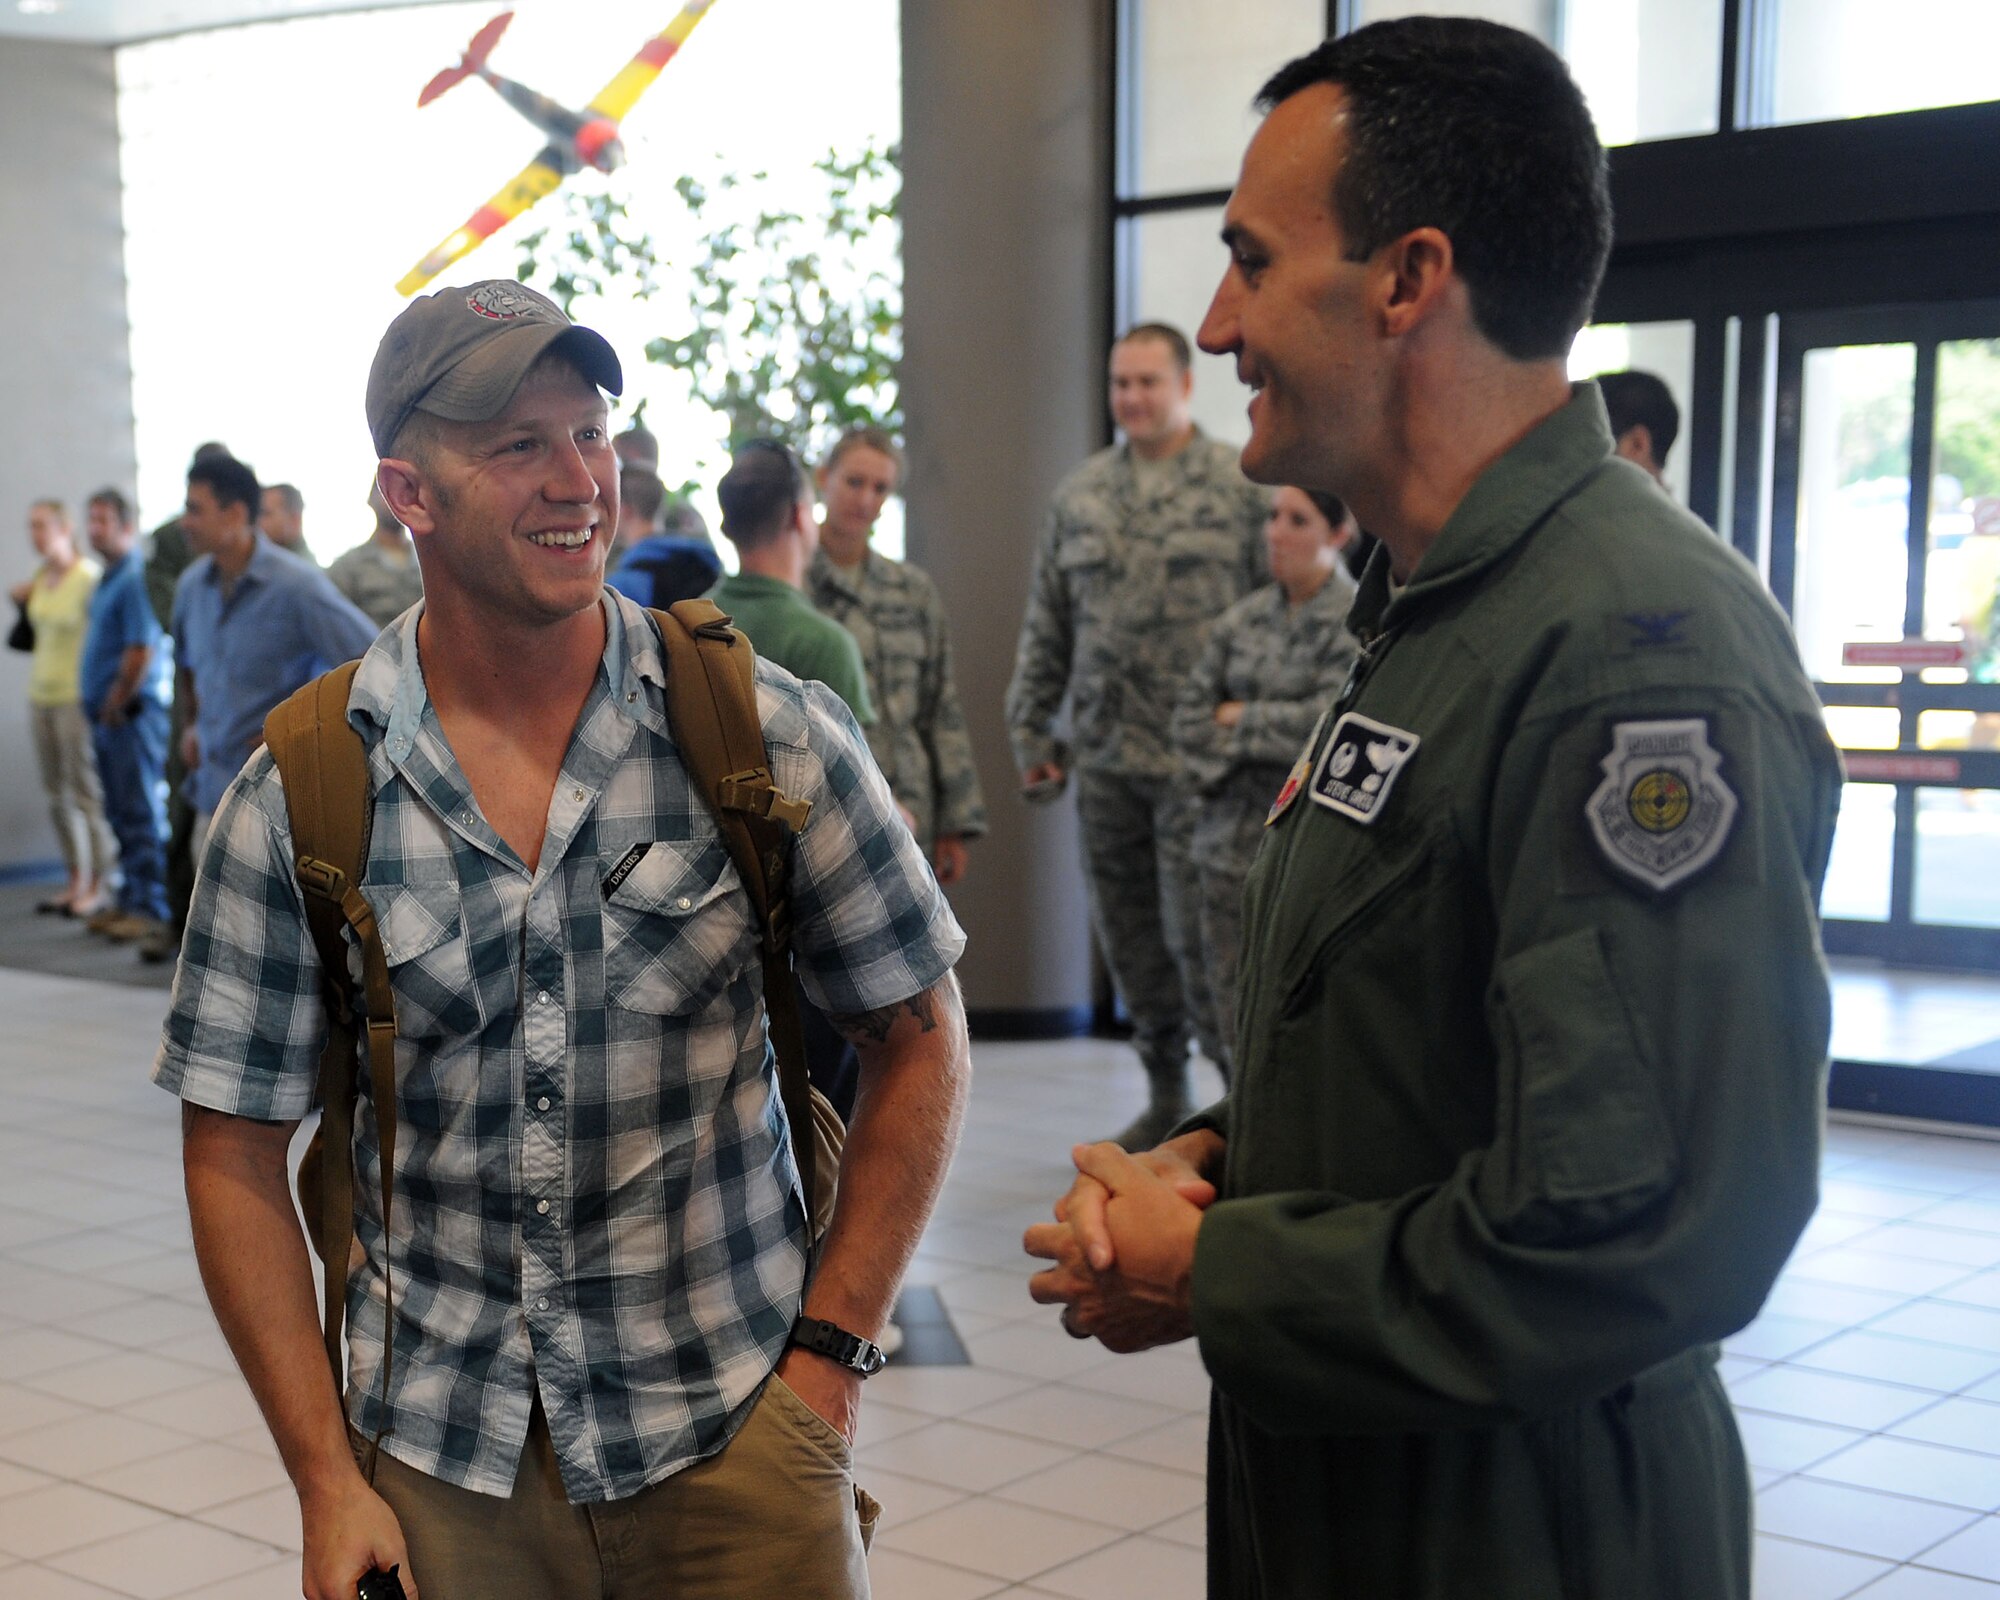 U.S. Air Force Col. Steven Gregg, 347th Rescue Group commander, speaks to Staff Sgt. Issaiah McPheron, 38th Rescue Squadron pararescueman, at the Valdosta Regional Airport, Valdosta, Ga., July 17, 2012. McPheron worked alongside other military branches in support of operations in Southwest Asia. (U.S. Air Force photo by Staff Sgt. Ciara Wymbs/Released)  